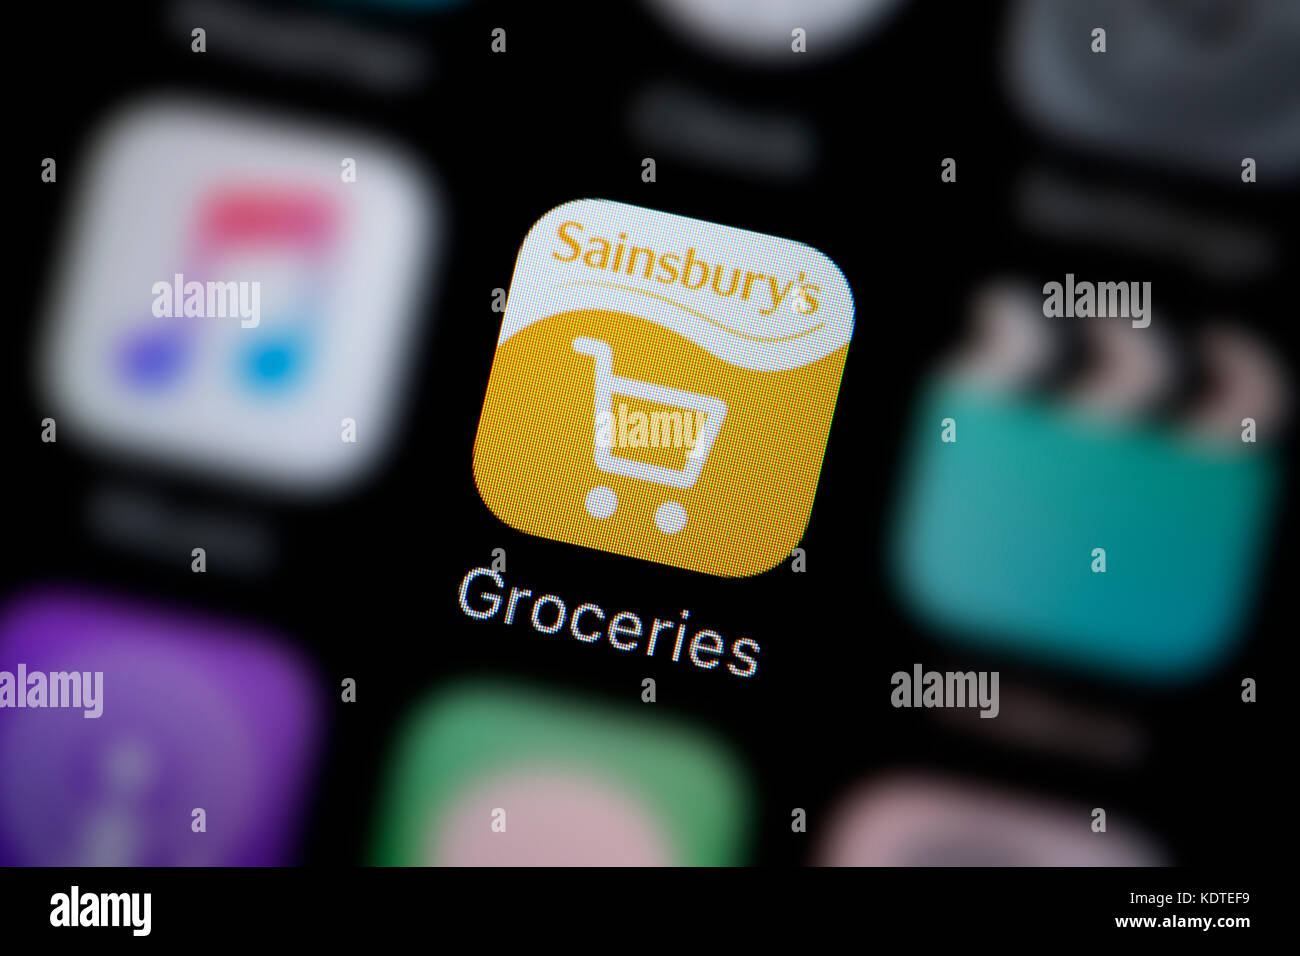 A close-up shot of the logo representing the Sainsbury's groceries app icon, as seen on the screen of a smart phone (Editorial use only) Stock Photo